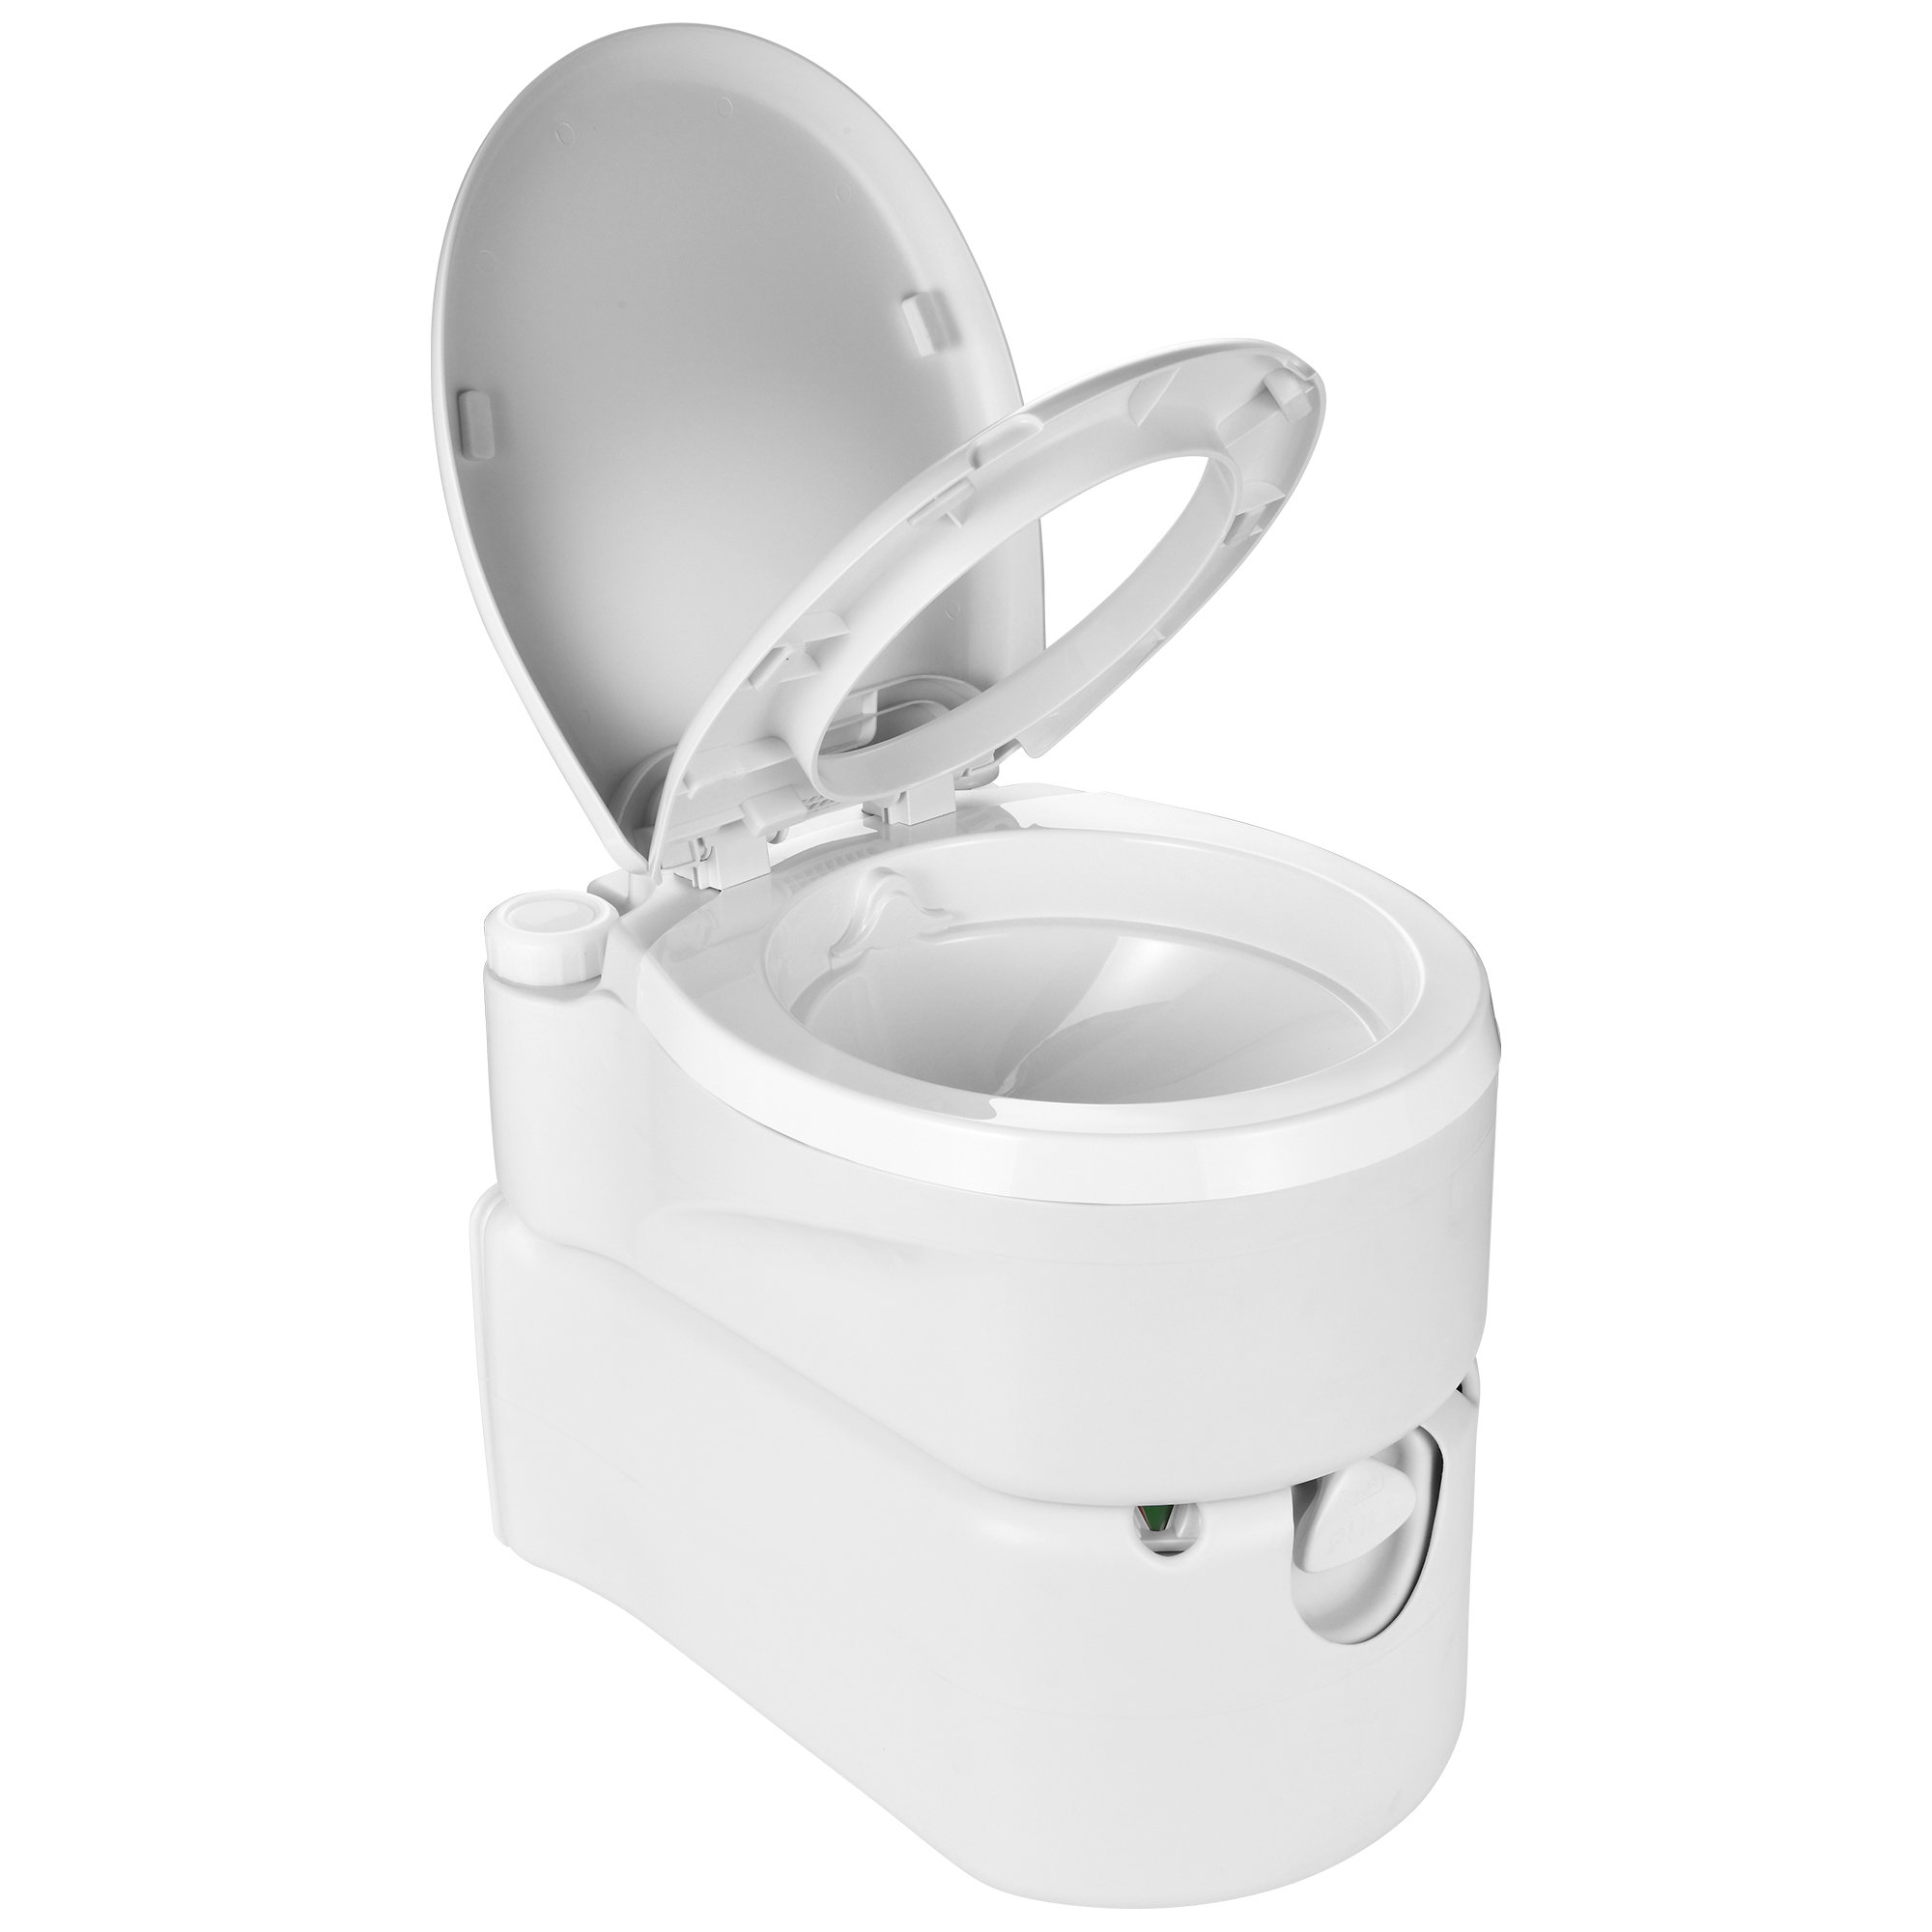 Best Camper Toilet - Camping Toilet Review - Flushing Camp Toilet Yitahome  Portable Toilet and Sink 